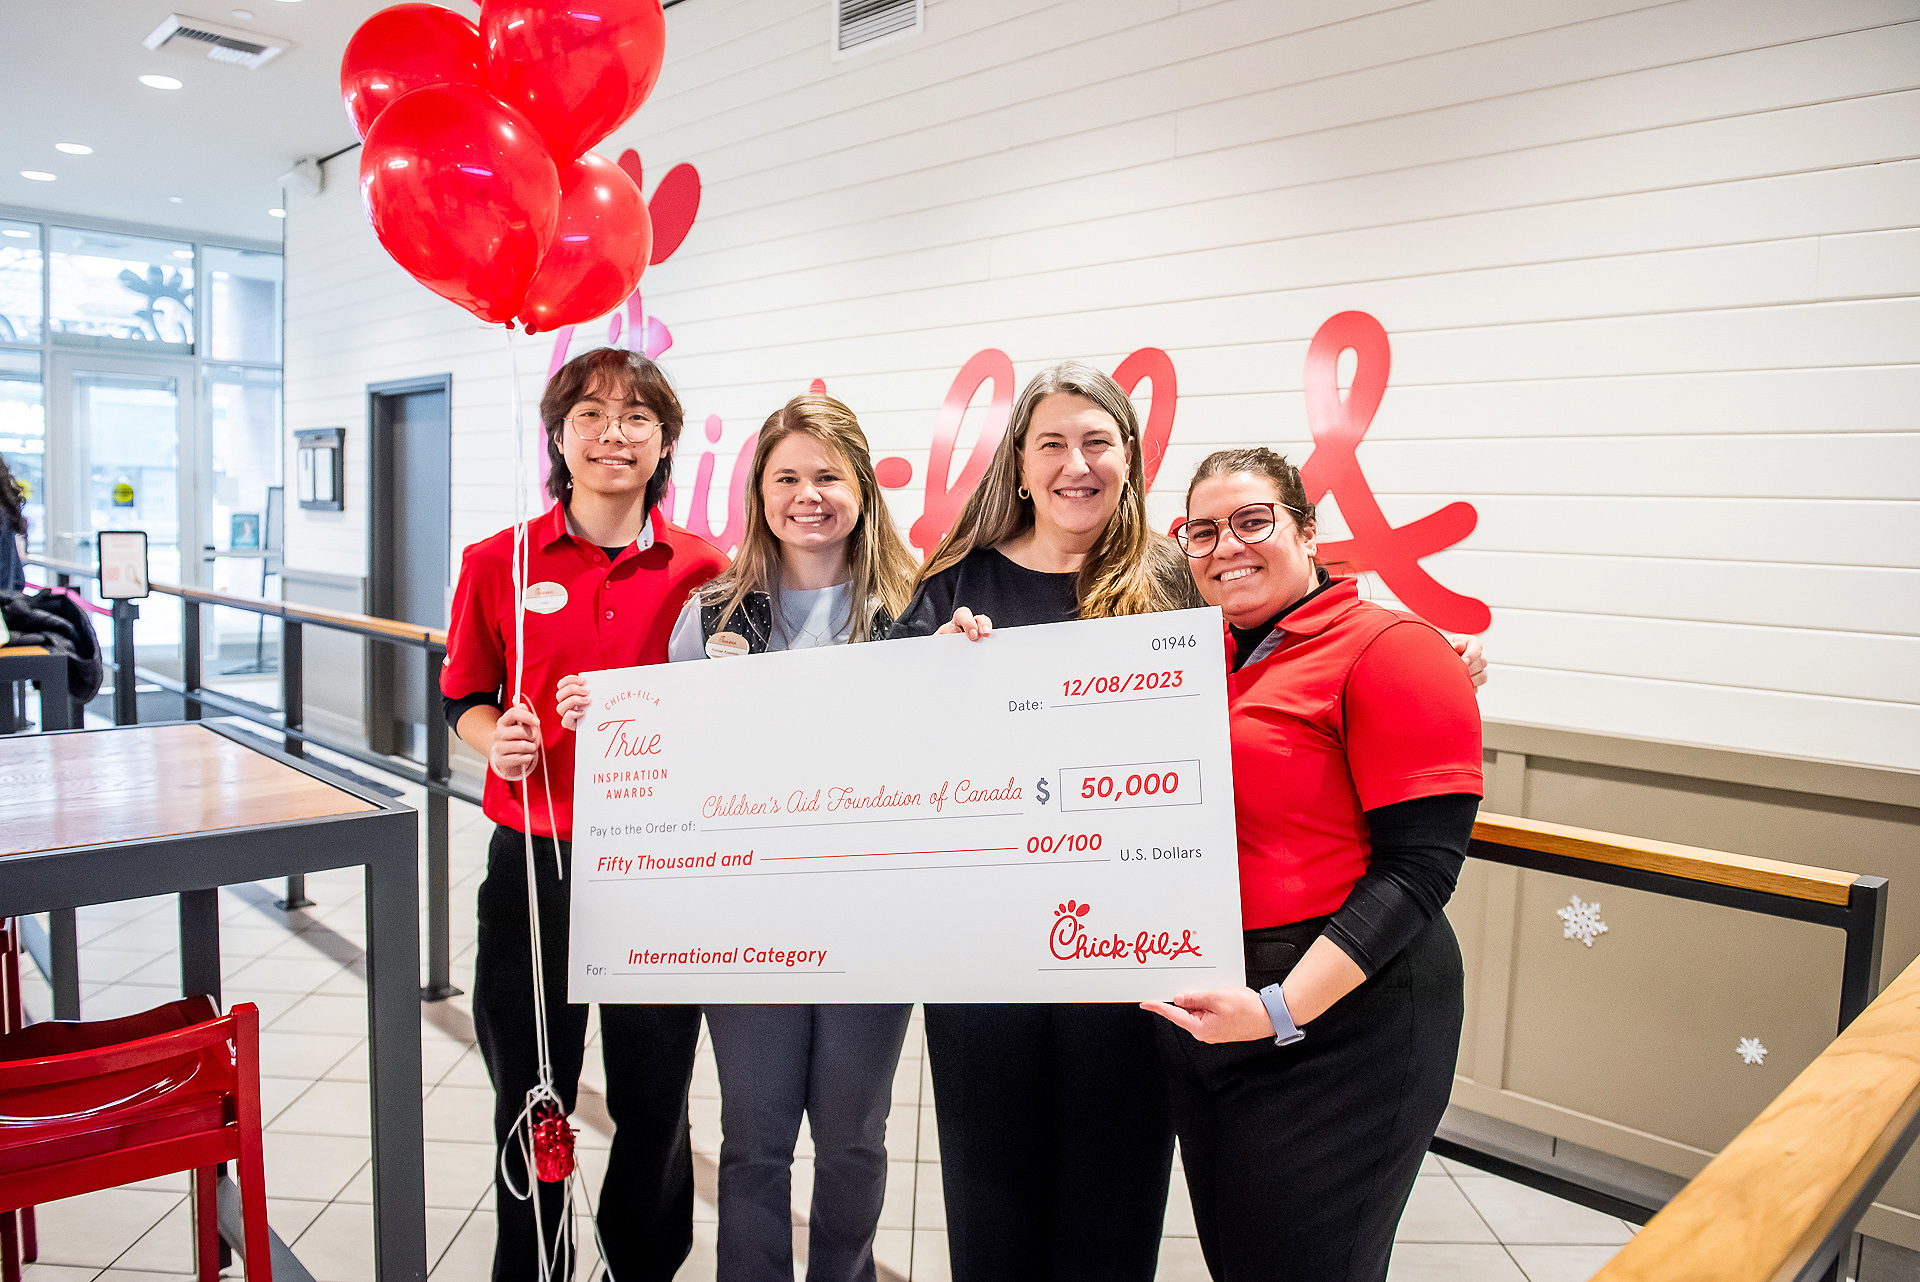 Children’s Aid Foundation of Canada received a $50,000 grant from Chick-fil-A, Inc. through the 2024 Chick-fil-A True Inspiration Awards.